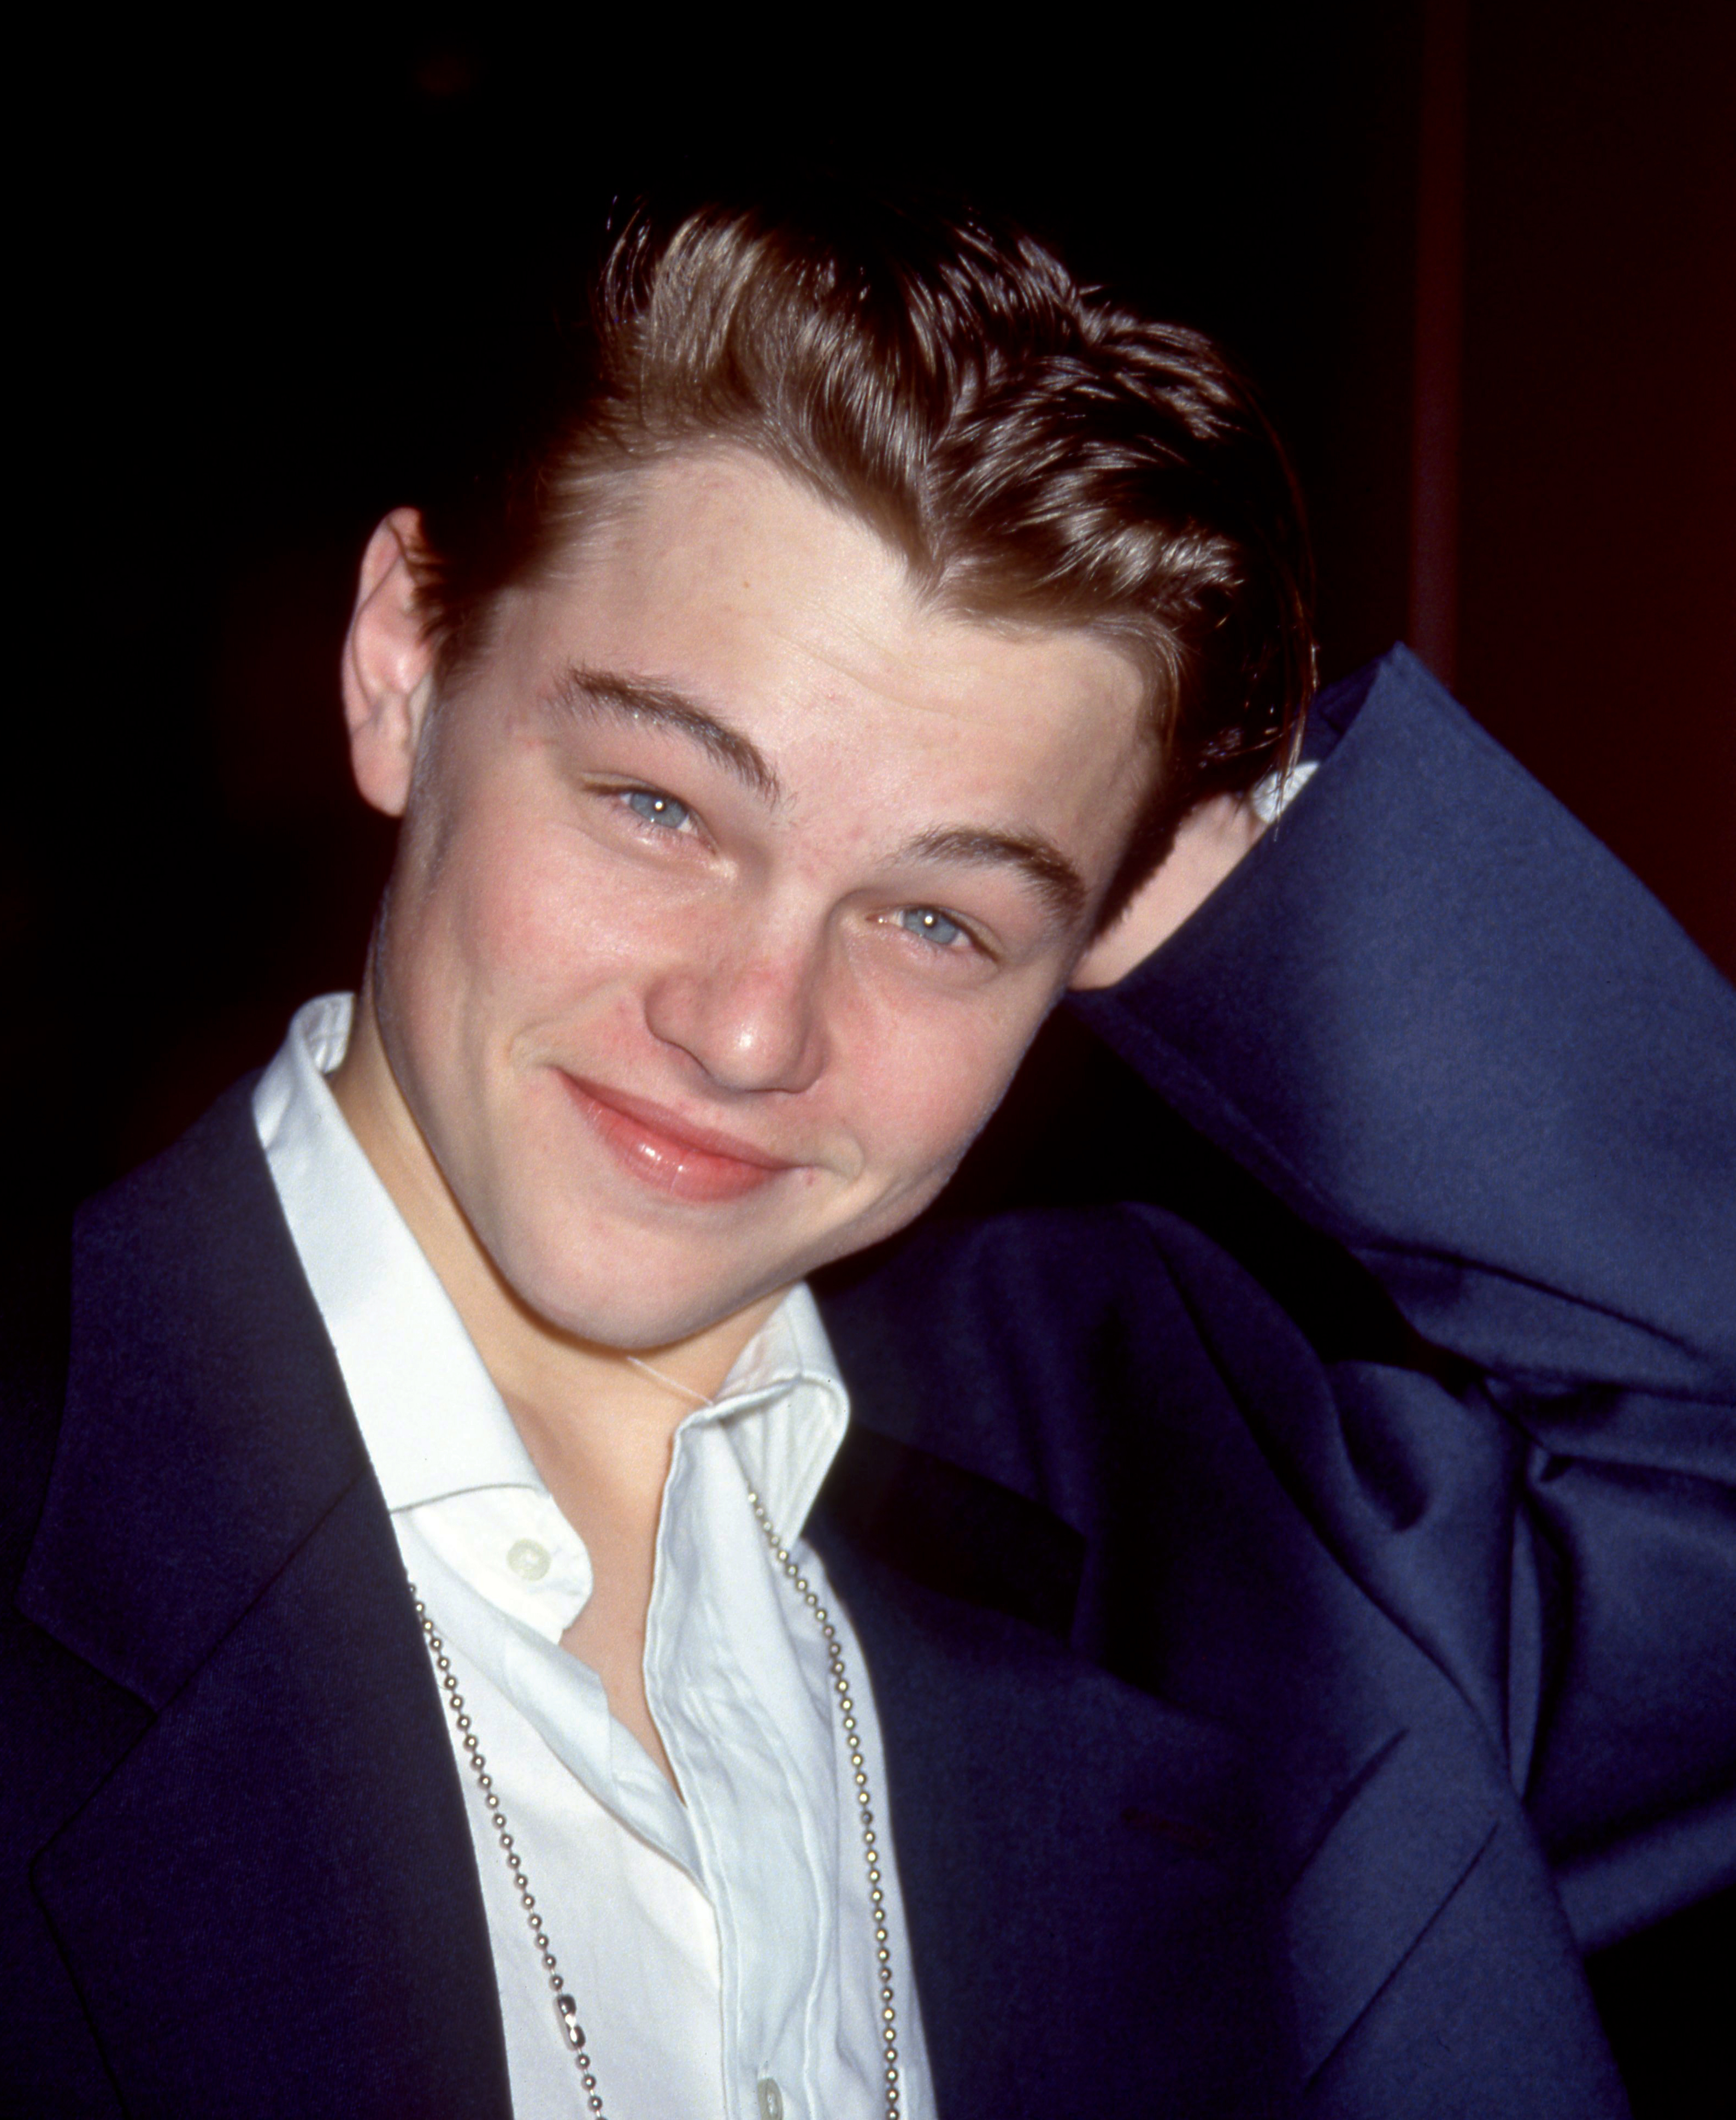 Leonardo DiCaprio at the Los Angeles premiere of "This Boy's Life," 1993 | Source: Getty Images